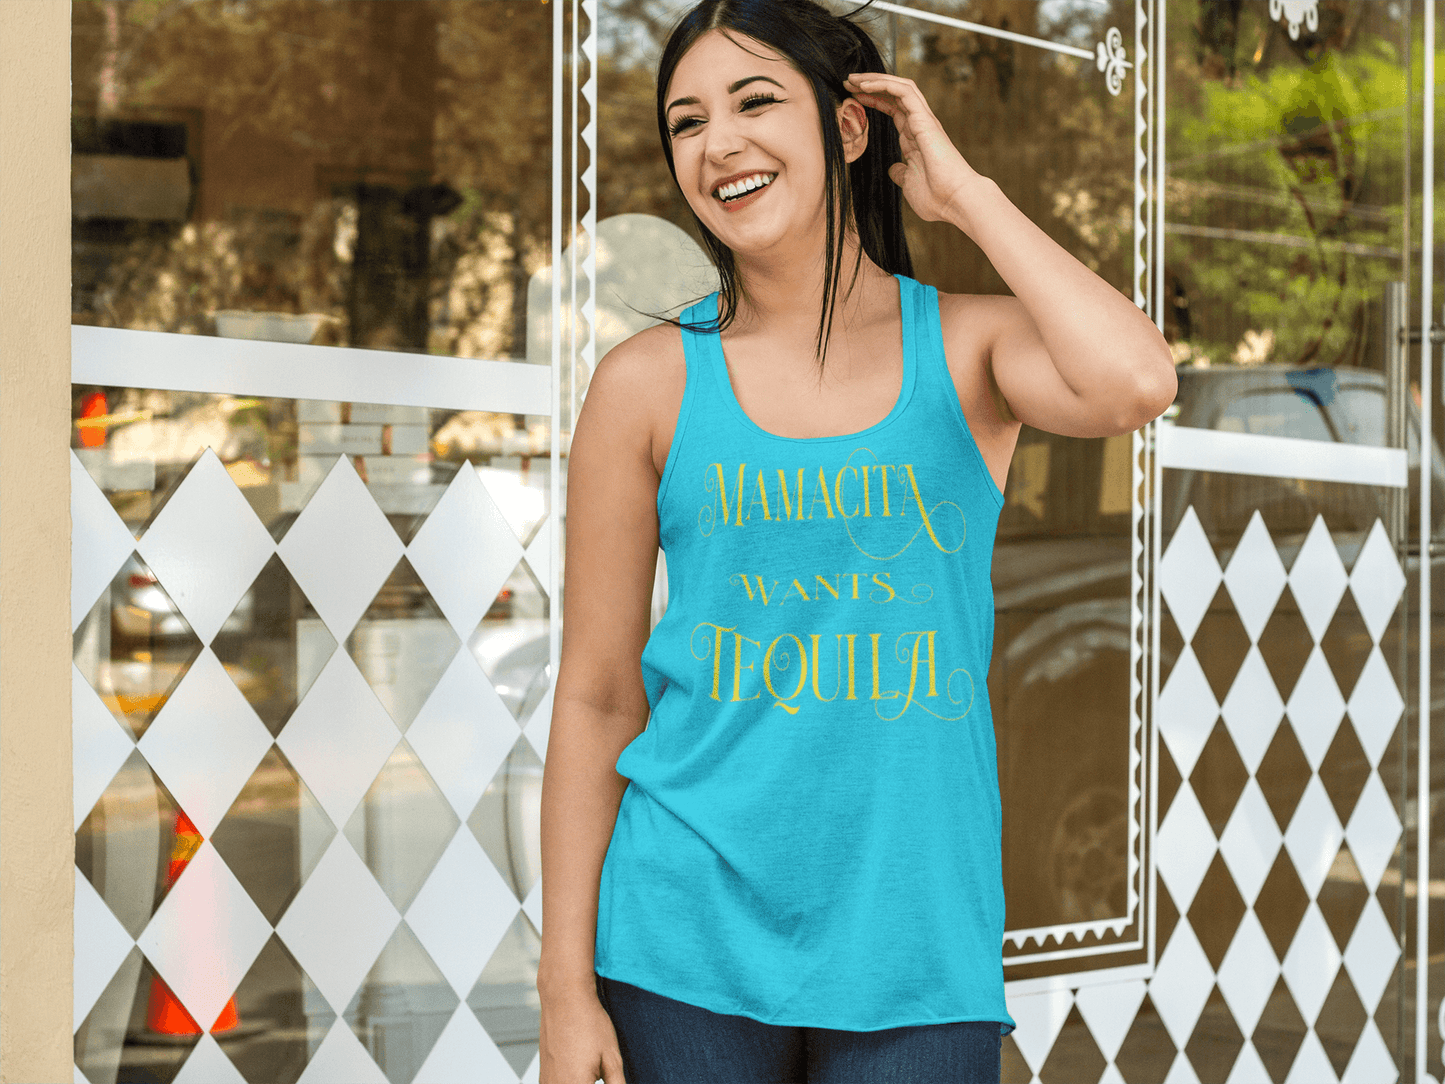 Teal racerback tank with the text, "Mamacita Wants Tequila" in scriptive font and yellow ink. This sexy tee comes in sizes small thru 3XL. It is available at www.sanchezhere.com